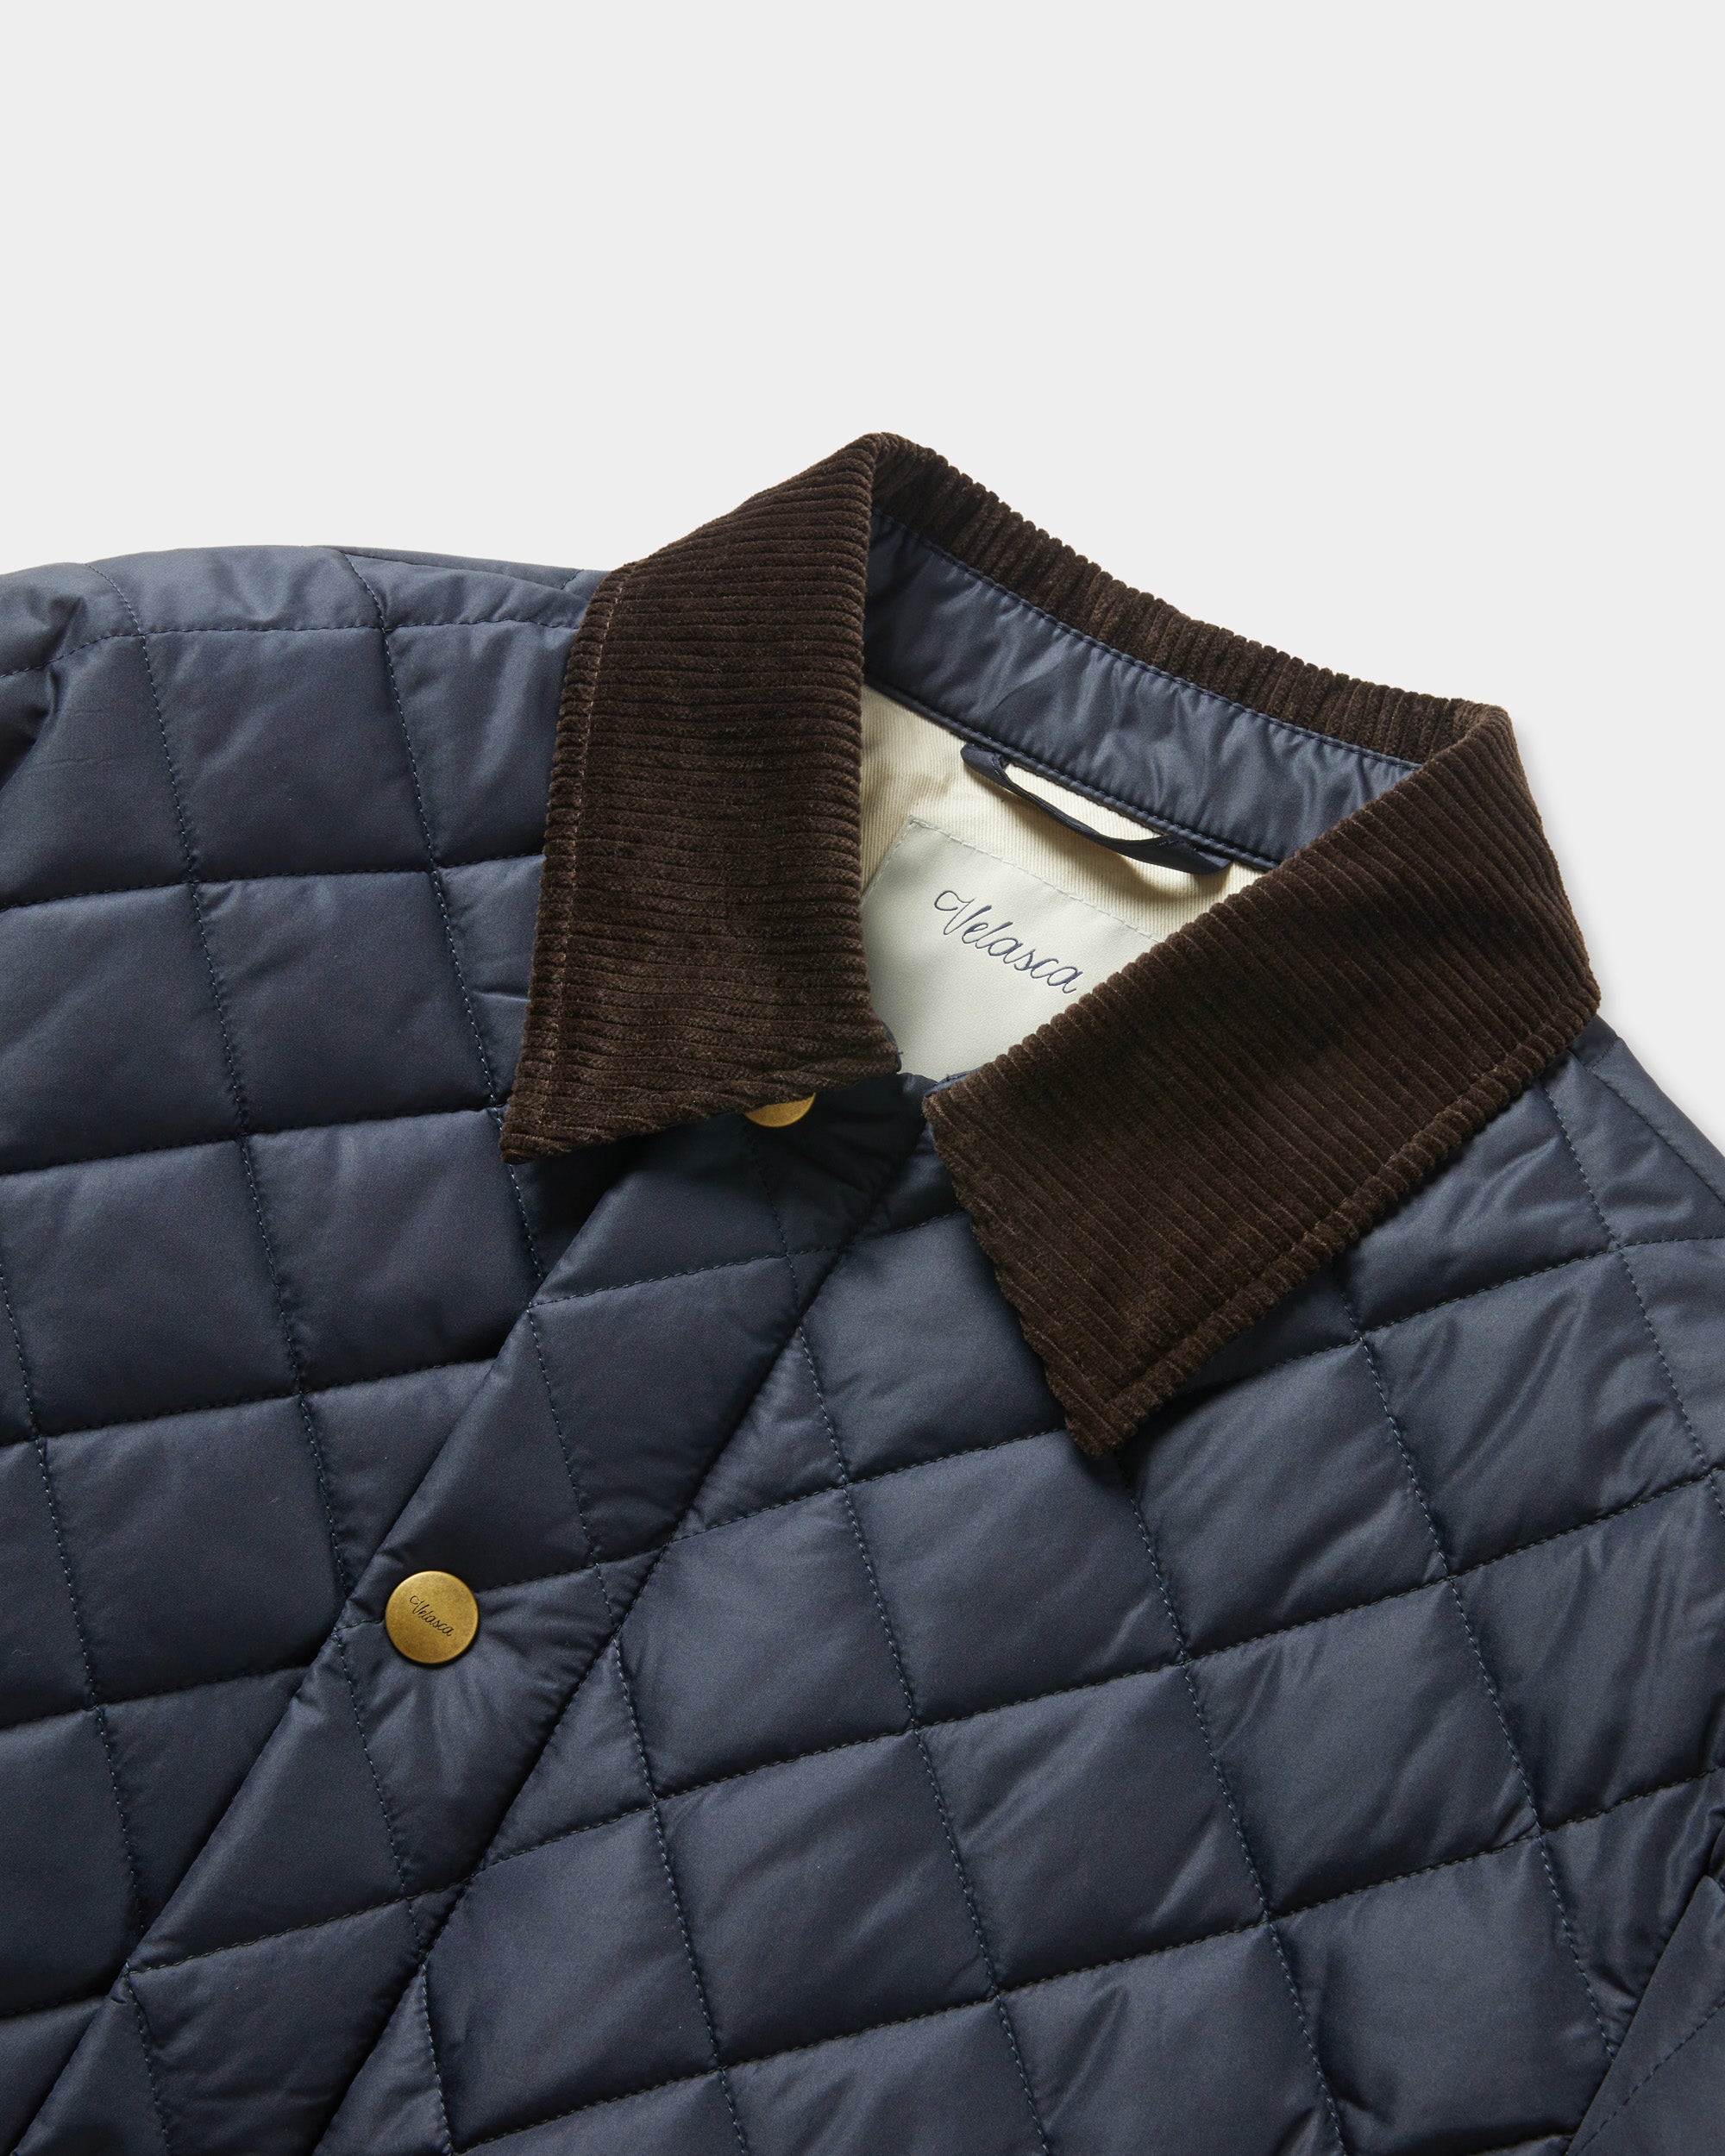 Velasca | Dark blue quilted jacket, casual. Made in Italy